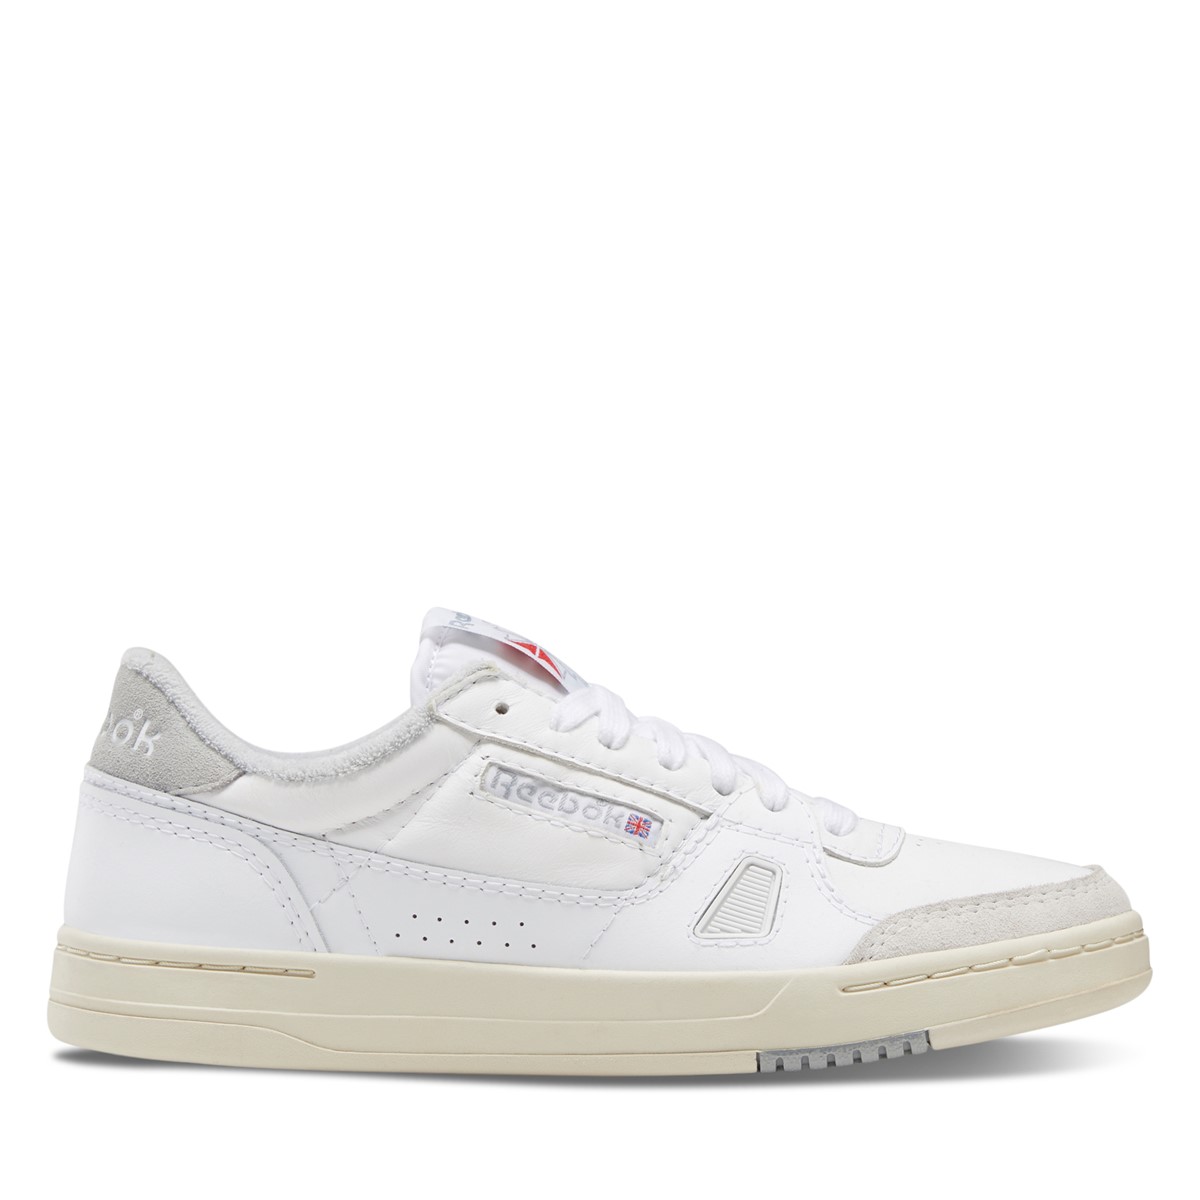 Men's LT Court Shoes in White/Grey